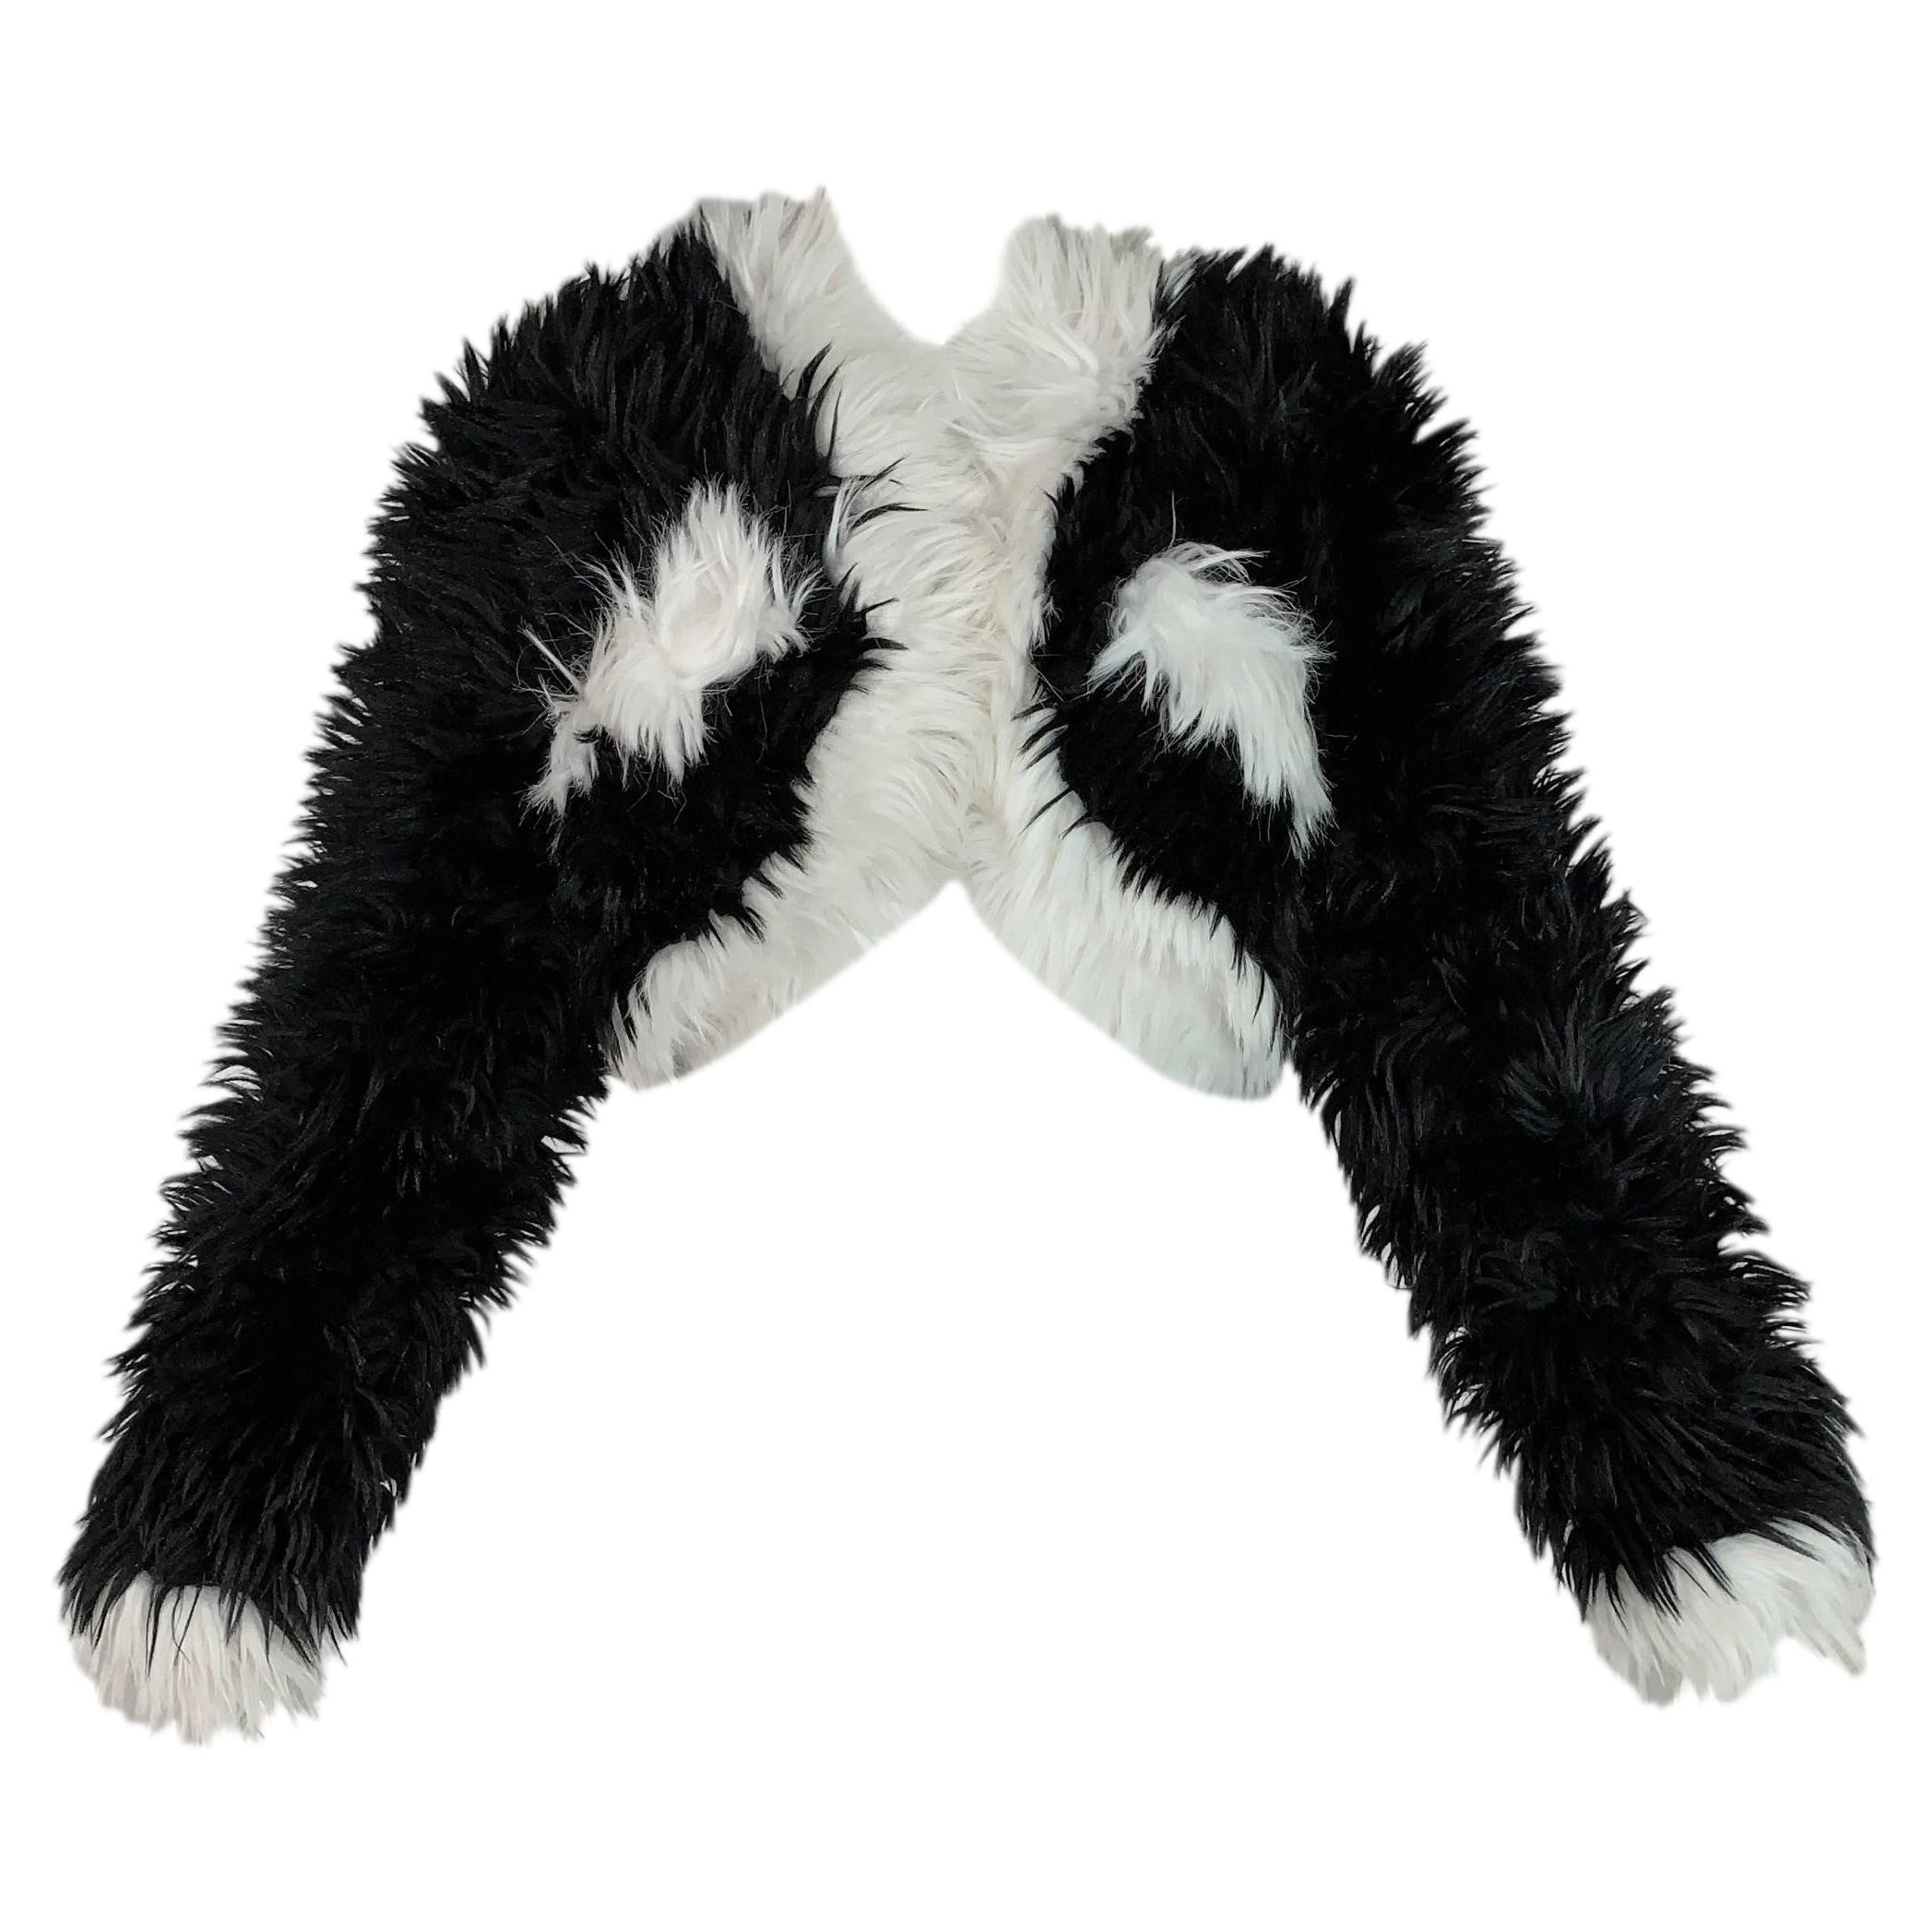 F/W 1994 Chanel Documented Runway Black & White Faux Fur Cropped Jacket